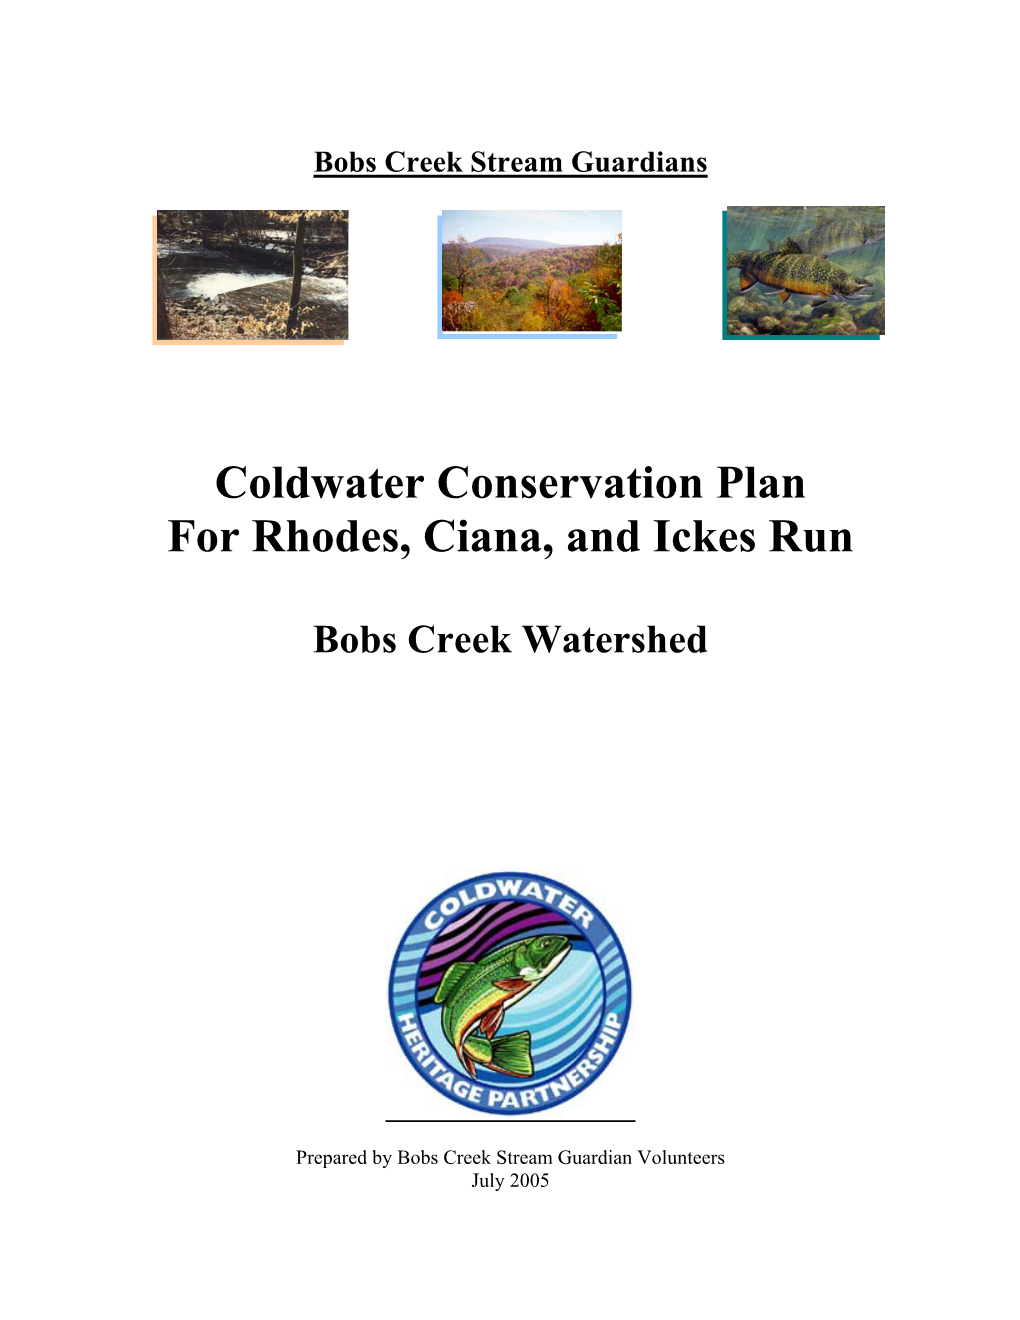 Coldwater Conservation Plan for Rhodes, Ciana, and Ickes Run